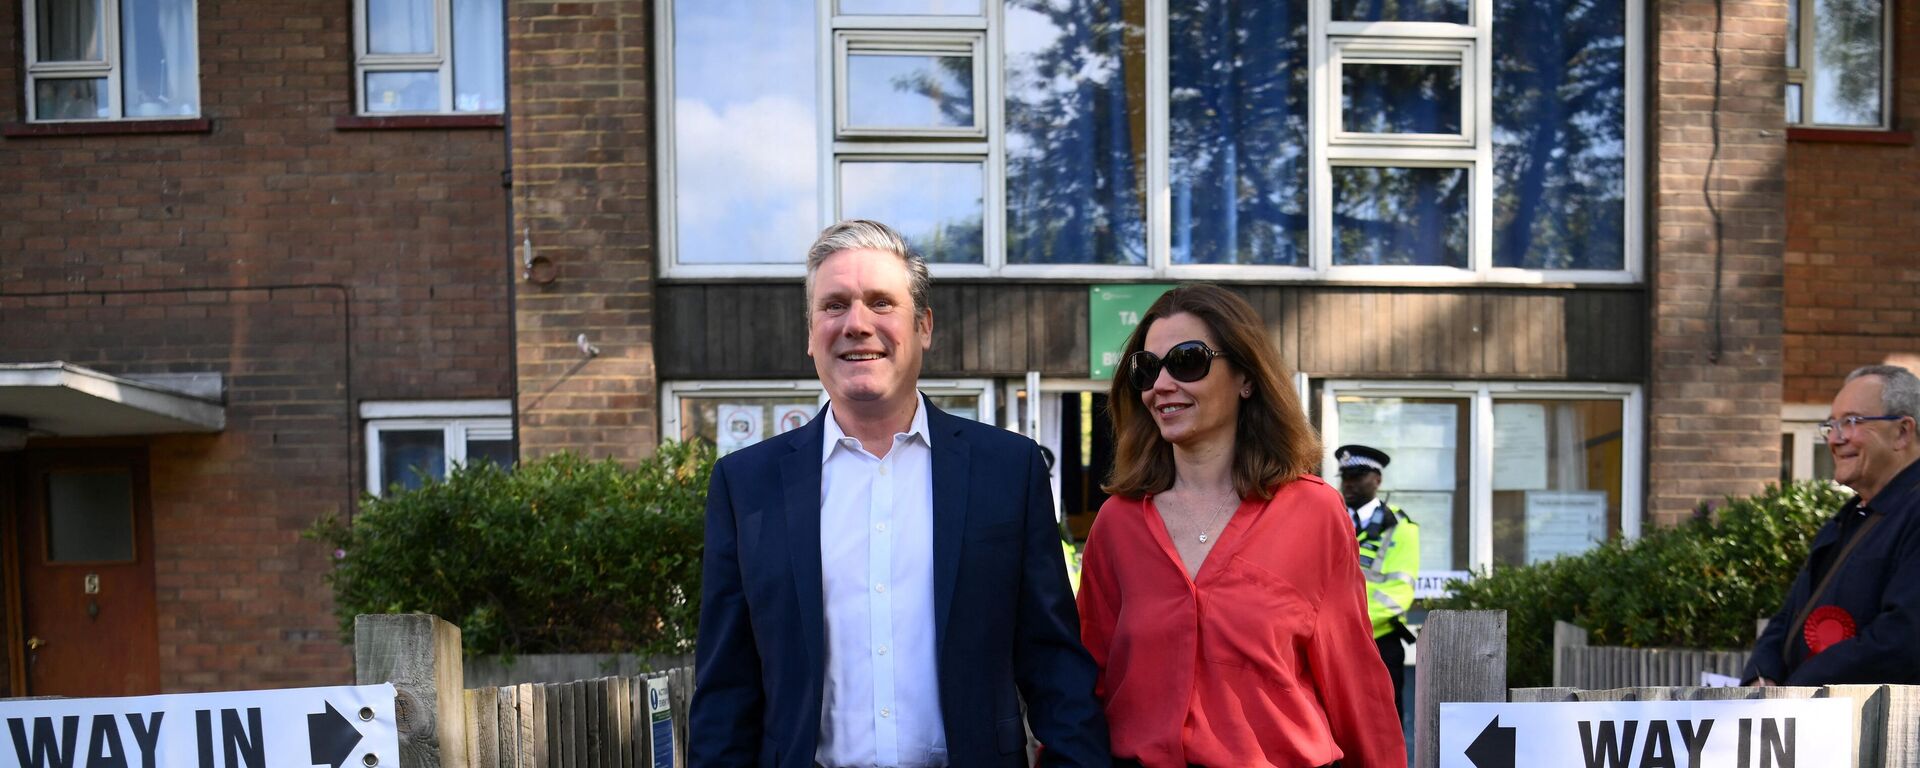 Britain's main opposition Labour Party leader Keir Starmer and his wife Victoria, leave a polling station, in London, after casting their vote in local elections, on May 5, 2022  - Sputnik International, 1920, 06.05.2022